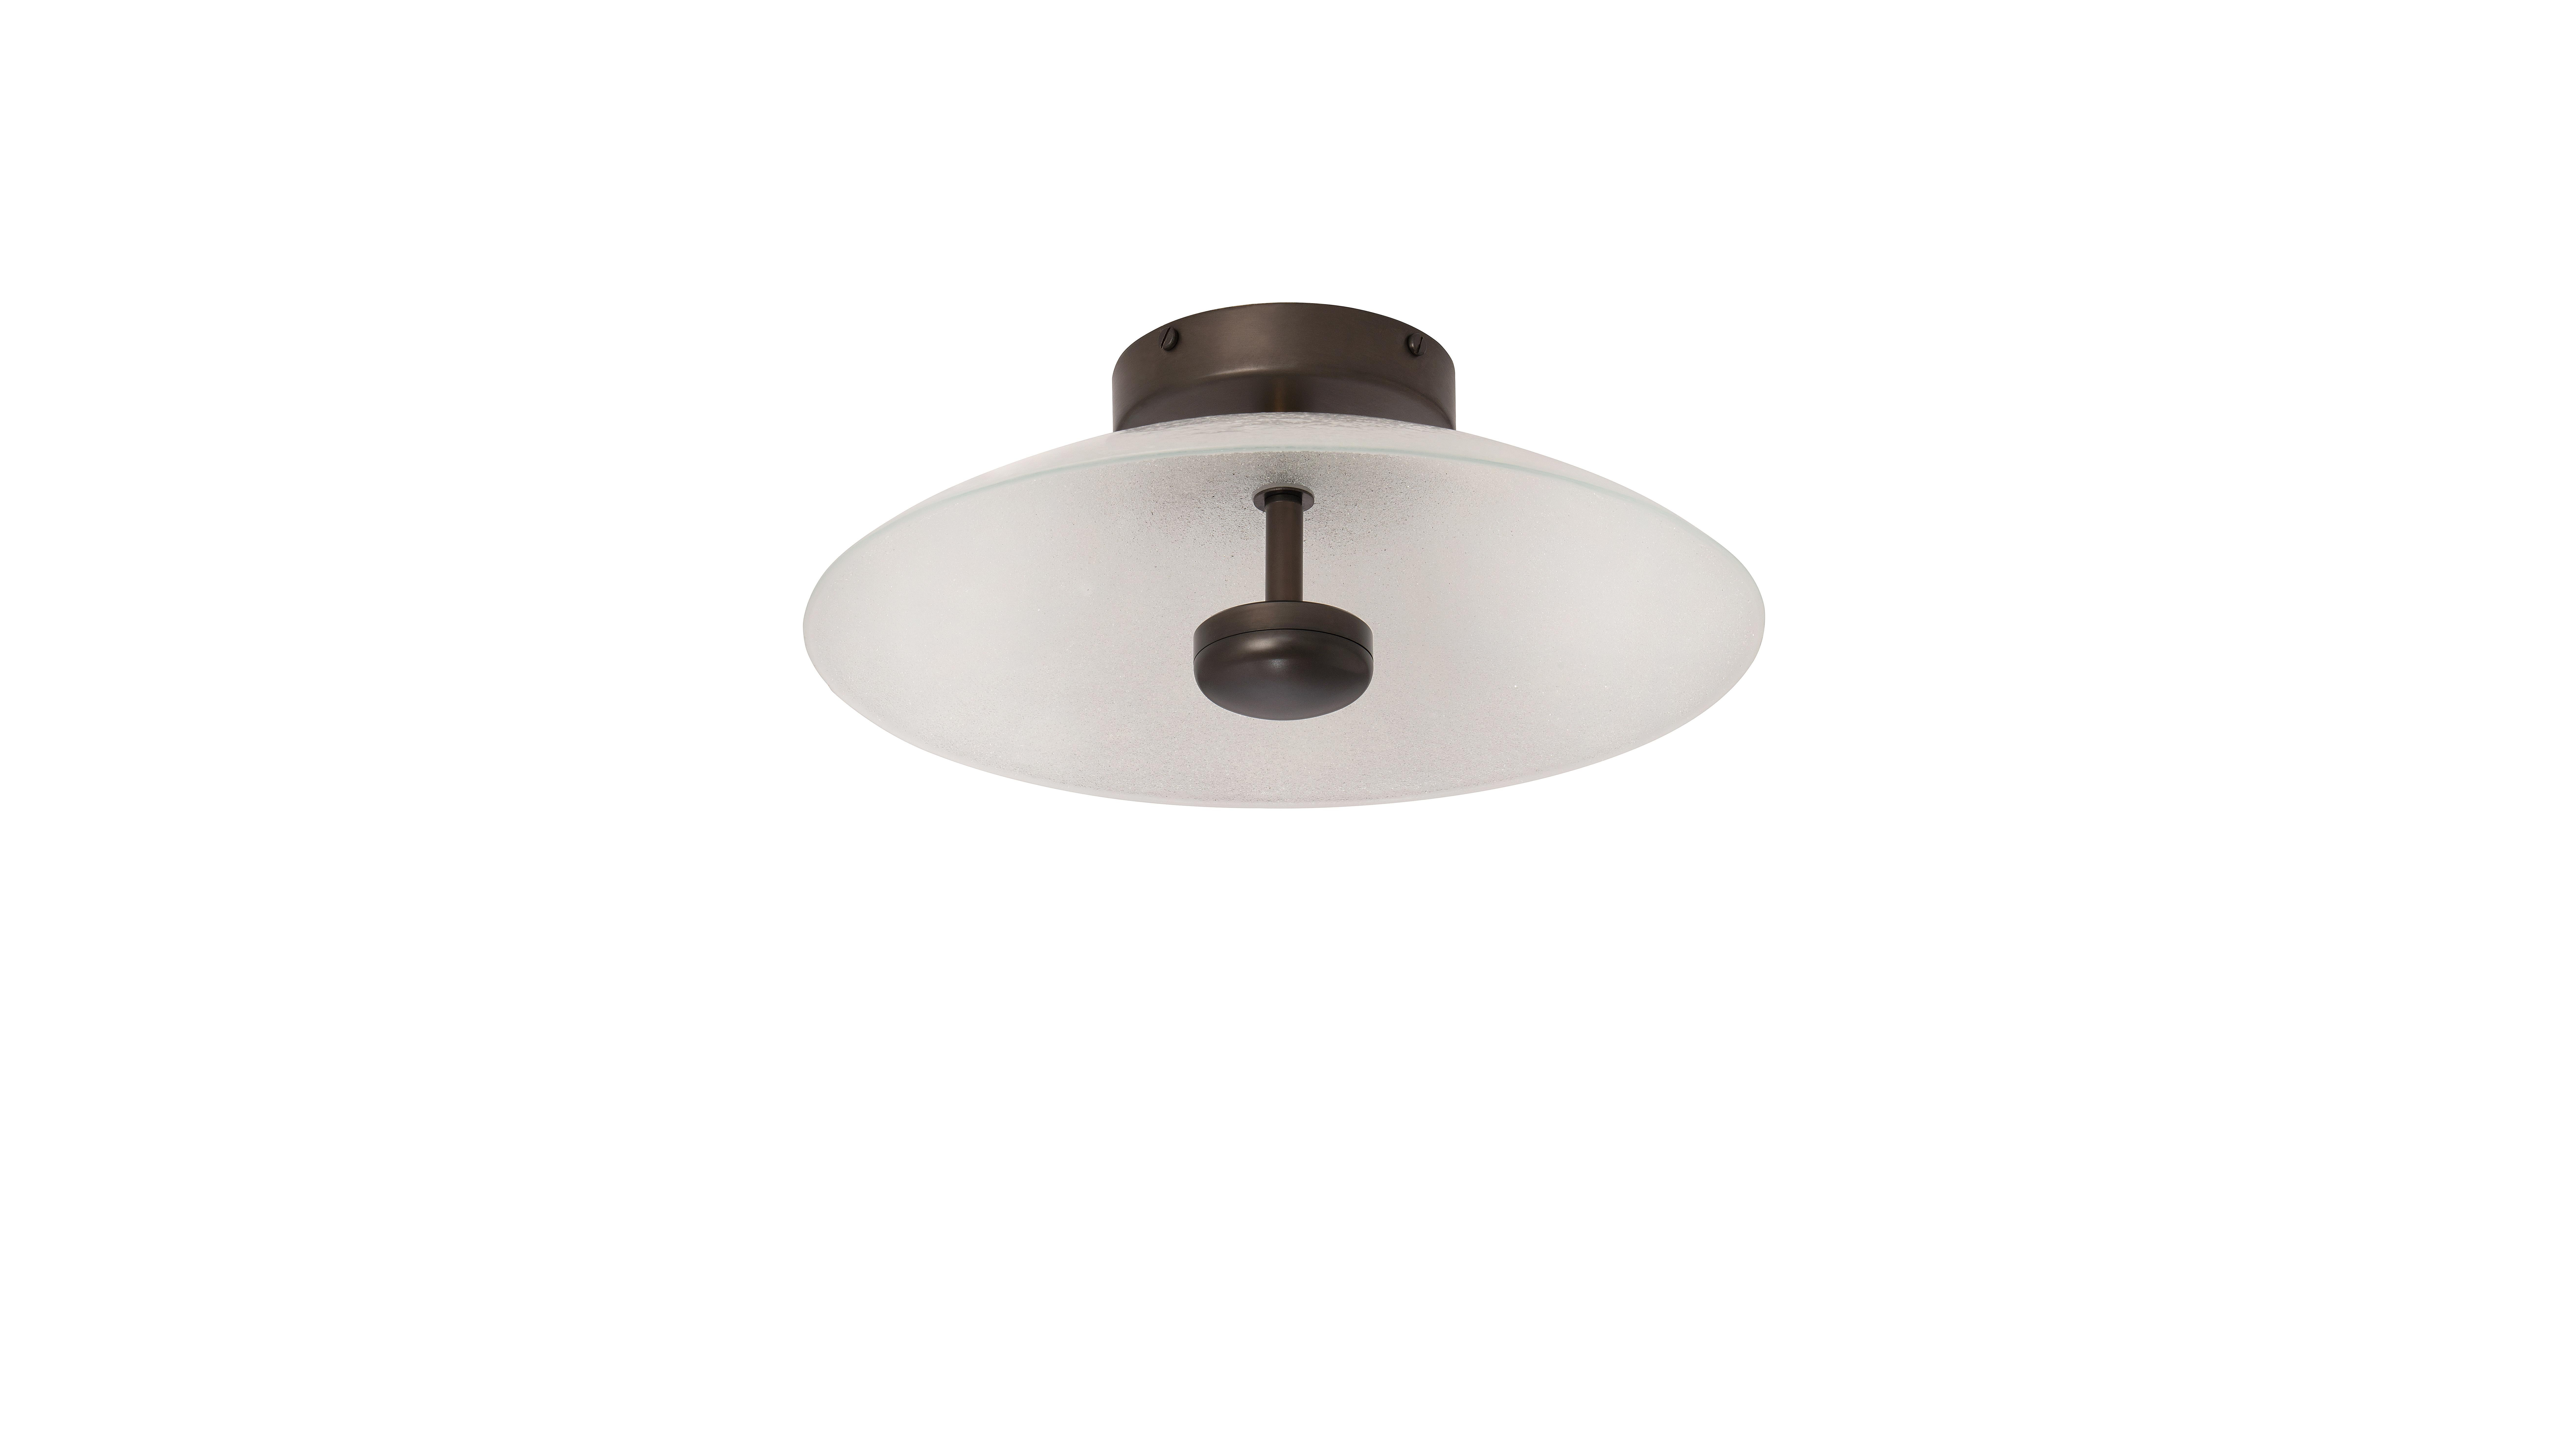 Cielo small ceiling lamp by CTO Lighting.
Materials: Bronze with hand fritted glass
Dimensions: W 31.5 x D 31.5 x H 13 cm

Integrated LED - trailing dimmable - 8w - 2700k 
Weight 3.5kg (7.7lbs)
Mounts onto 4” junction box

All our lamps can